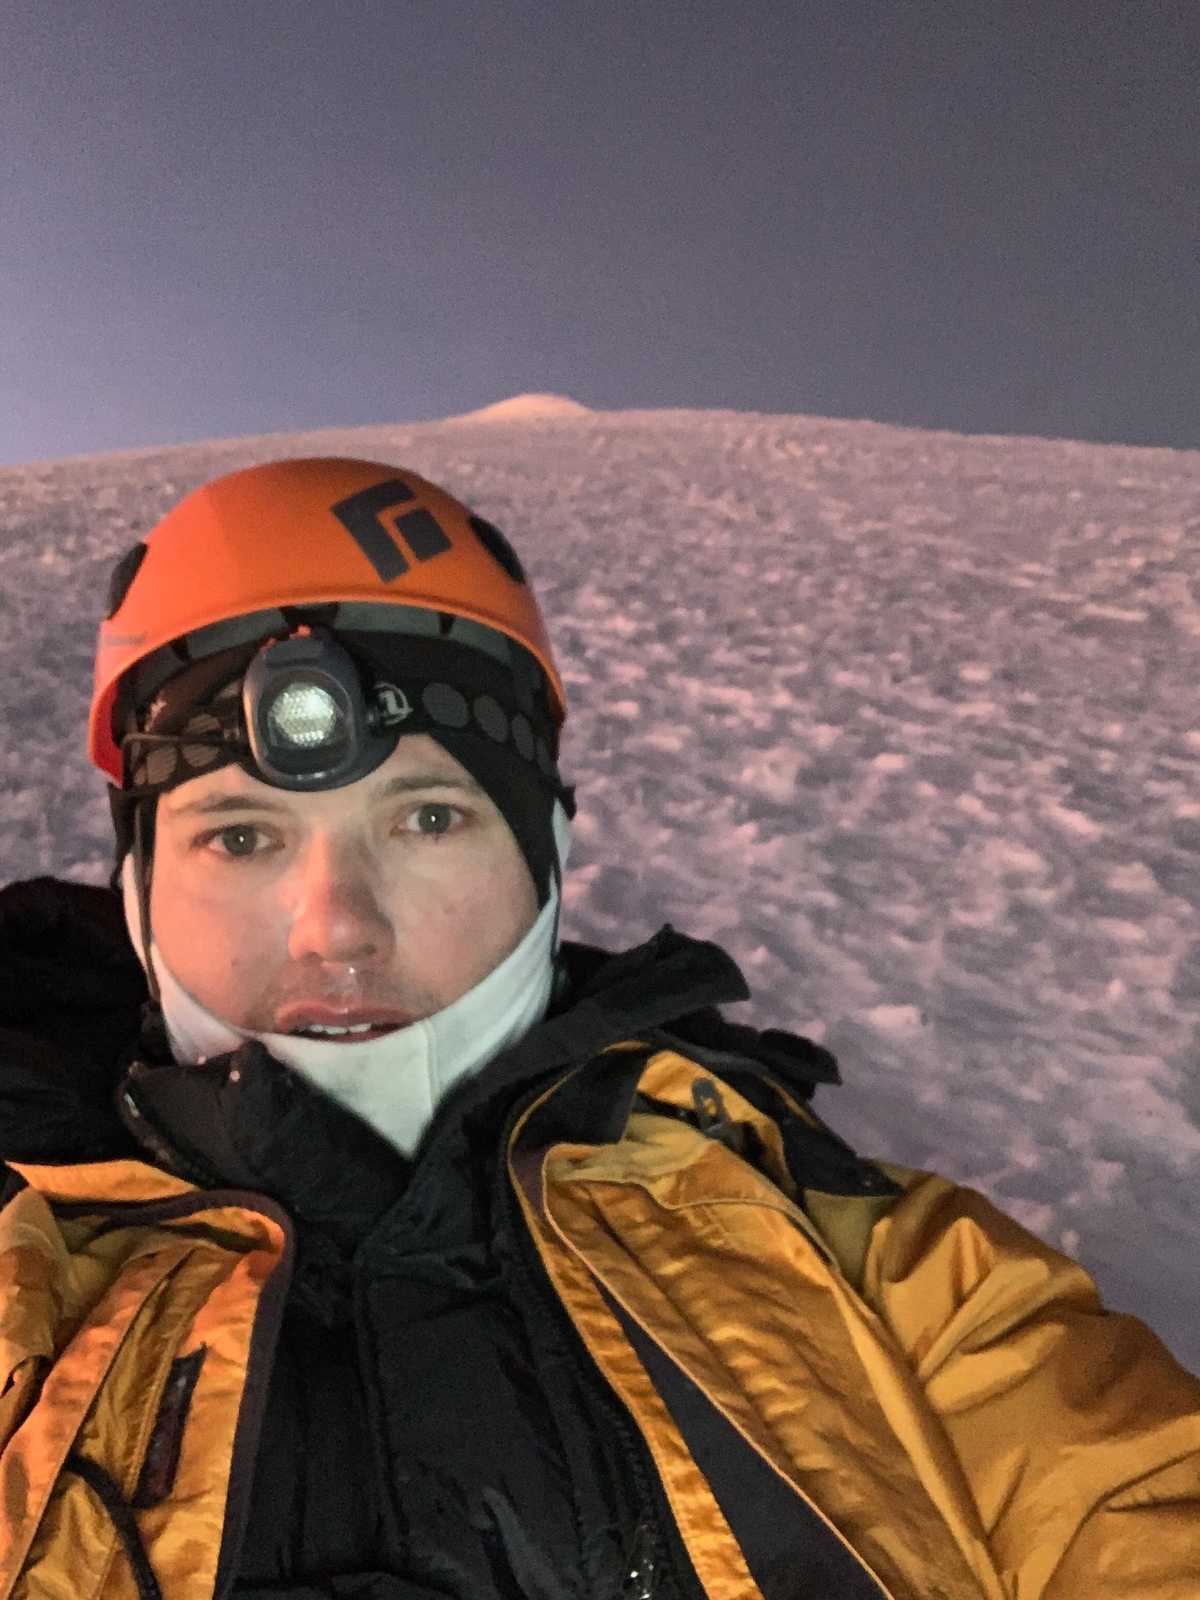 A climber looks very cold and tired. The summit of Illimani is still far above him.